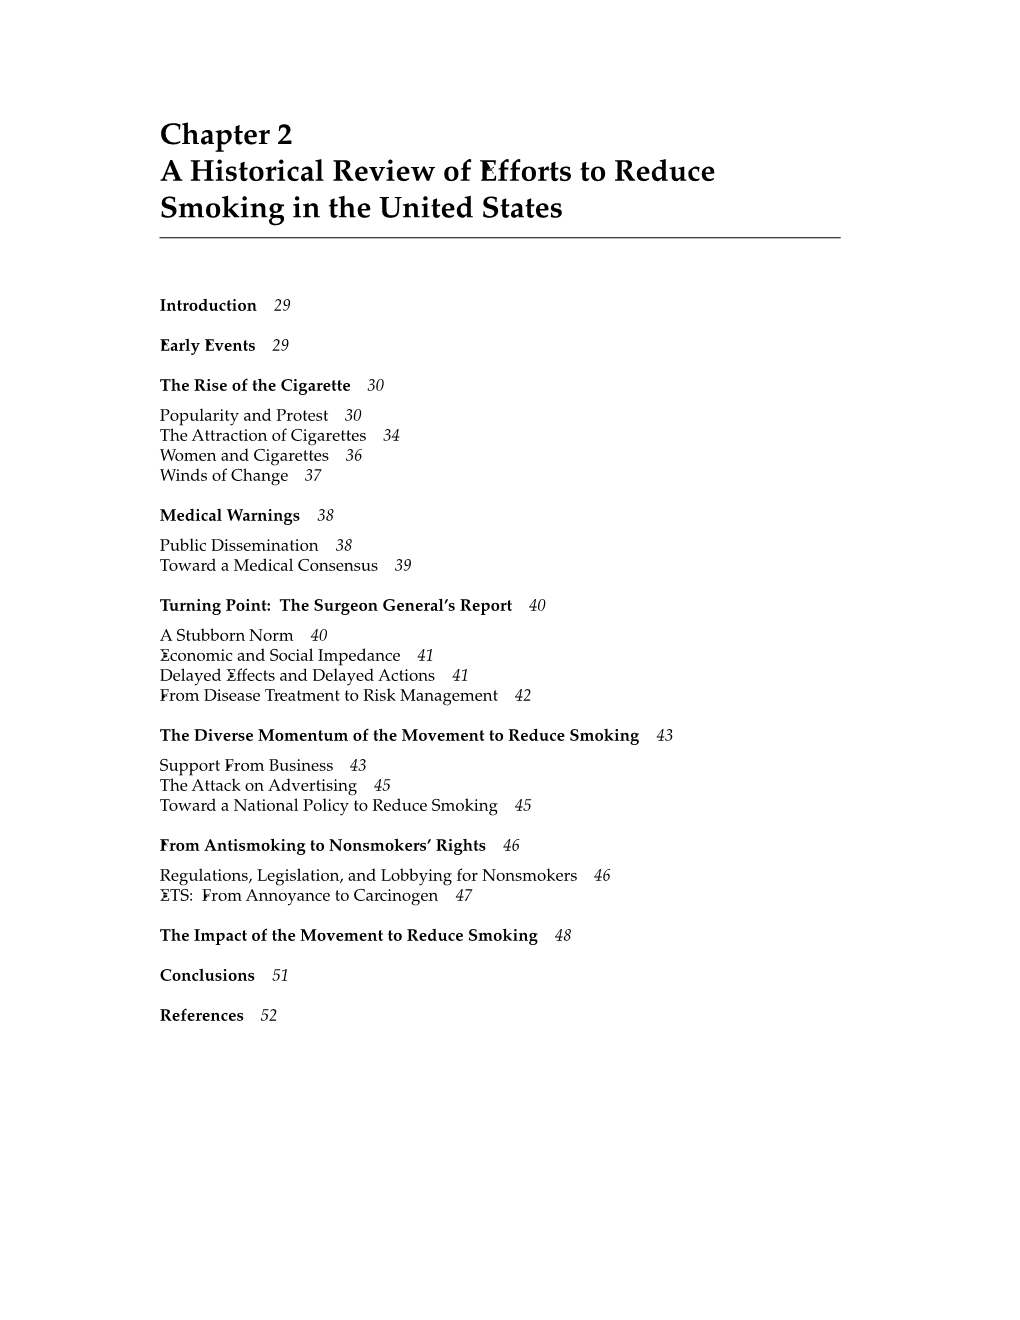 Chapter 2 a Historical Review of Efforts to Reduce Smoking in the United States